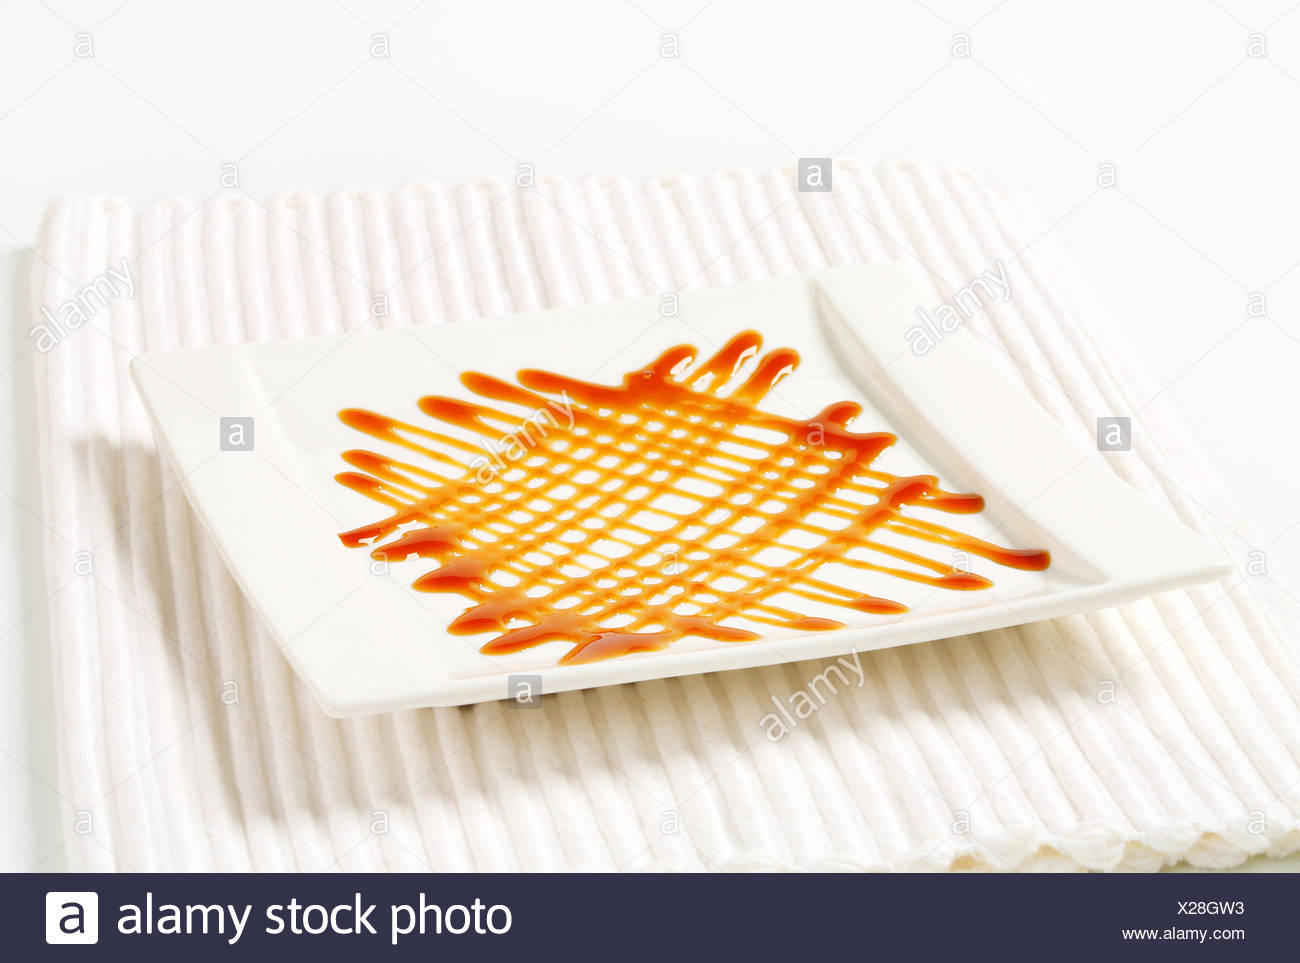 Caramel Drizzle Sauce Decoration On Plate Stock Photo